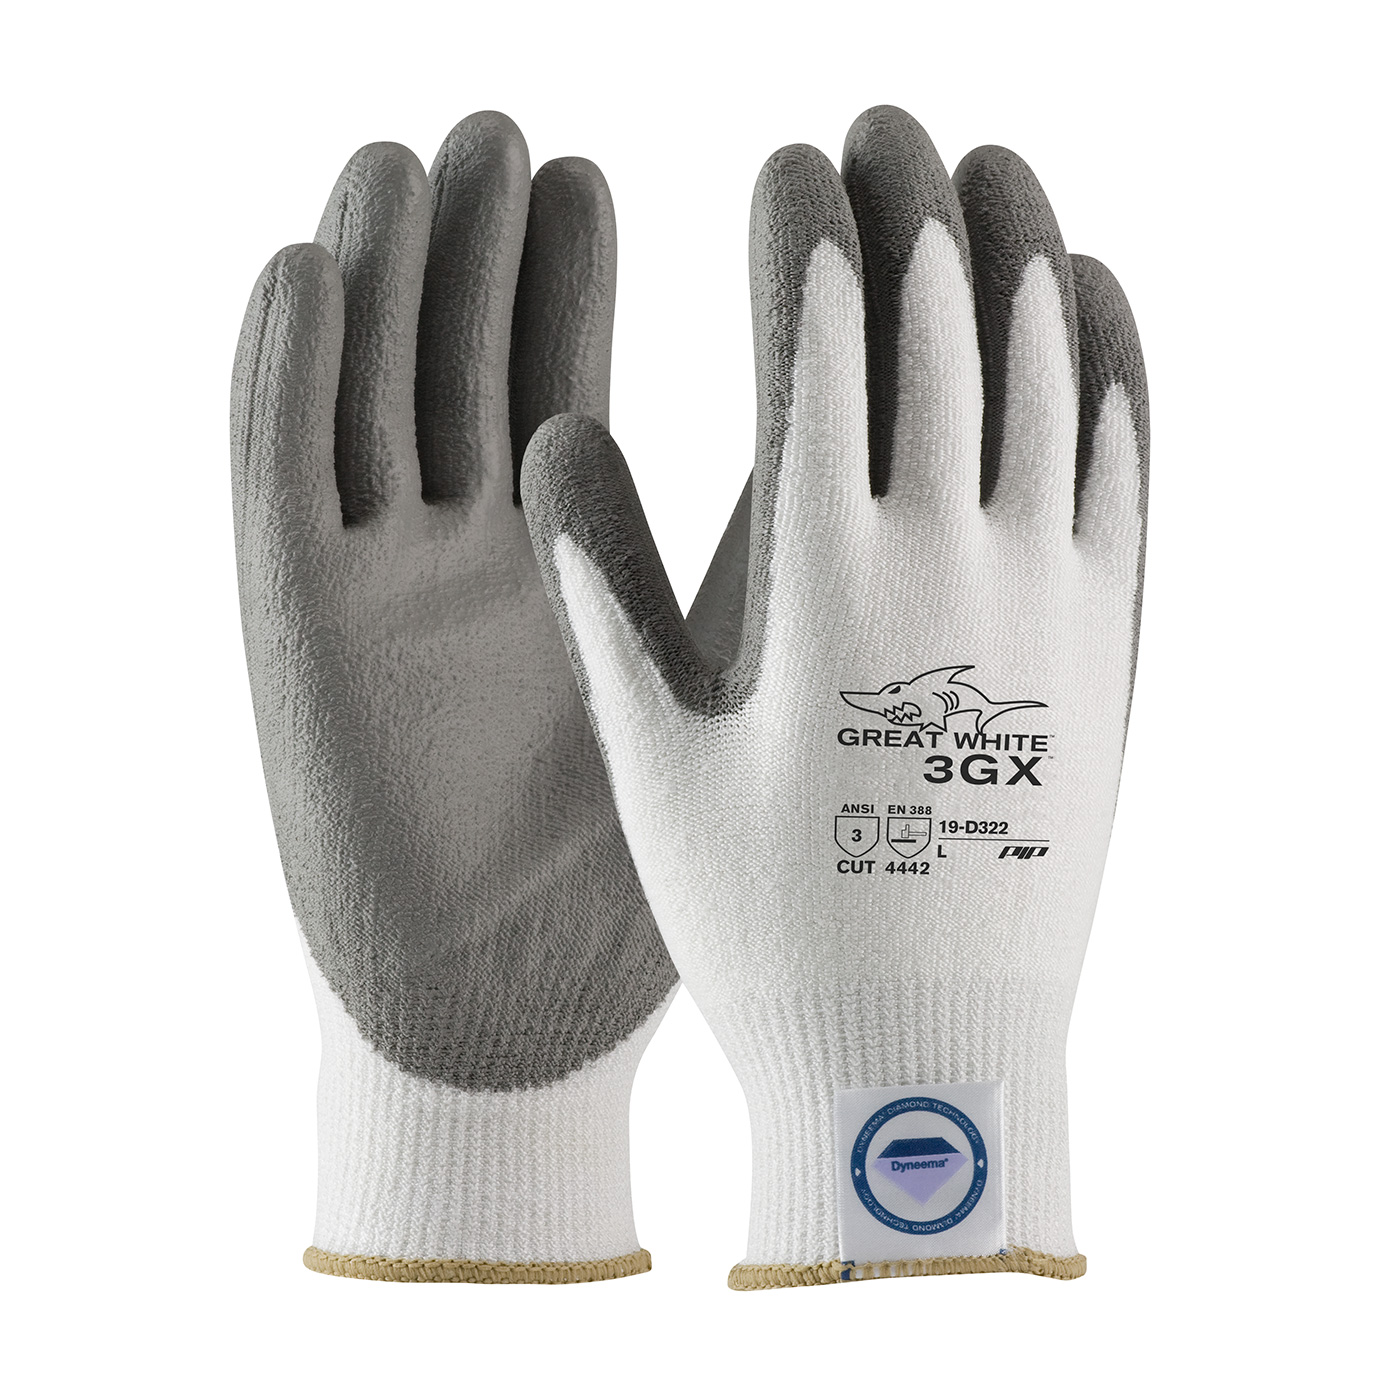 PIP 19-D322/XXL Great White 3GX Seamless Knit Dyneema Diamond Blended Glove with Polyurethane Coated Smooth Grip on Palm & Fingers - 2X-Large PID-19 D322 XXL